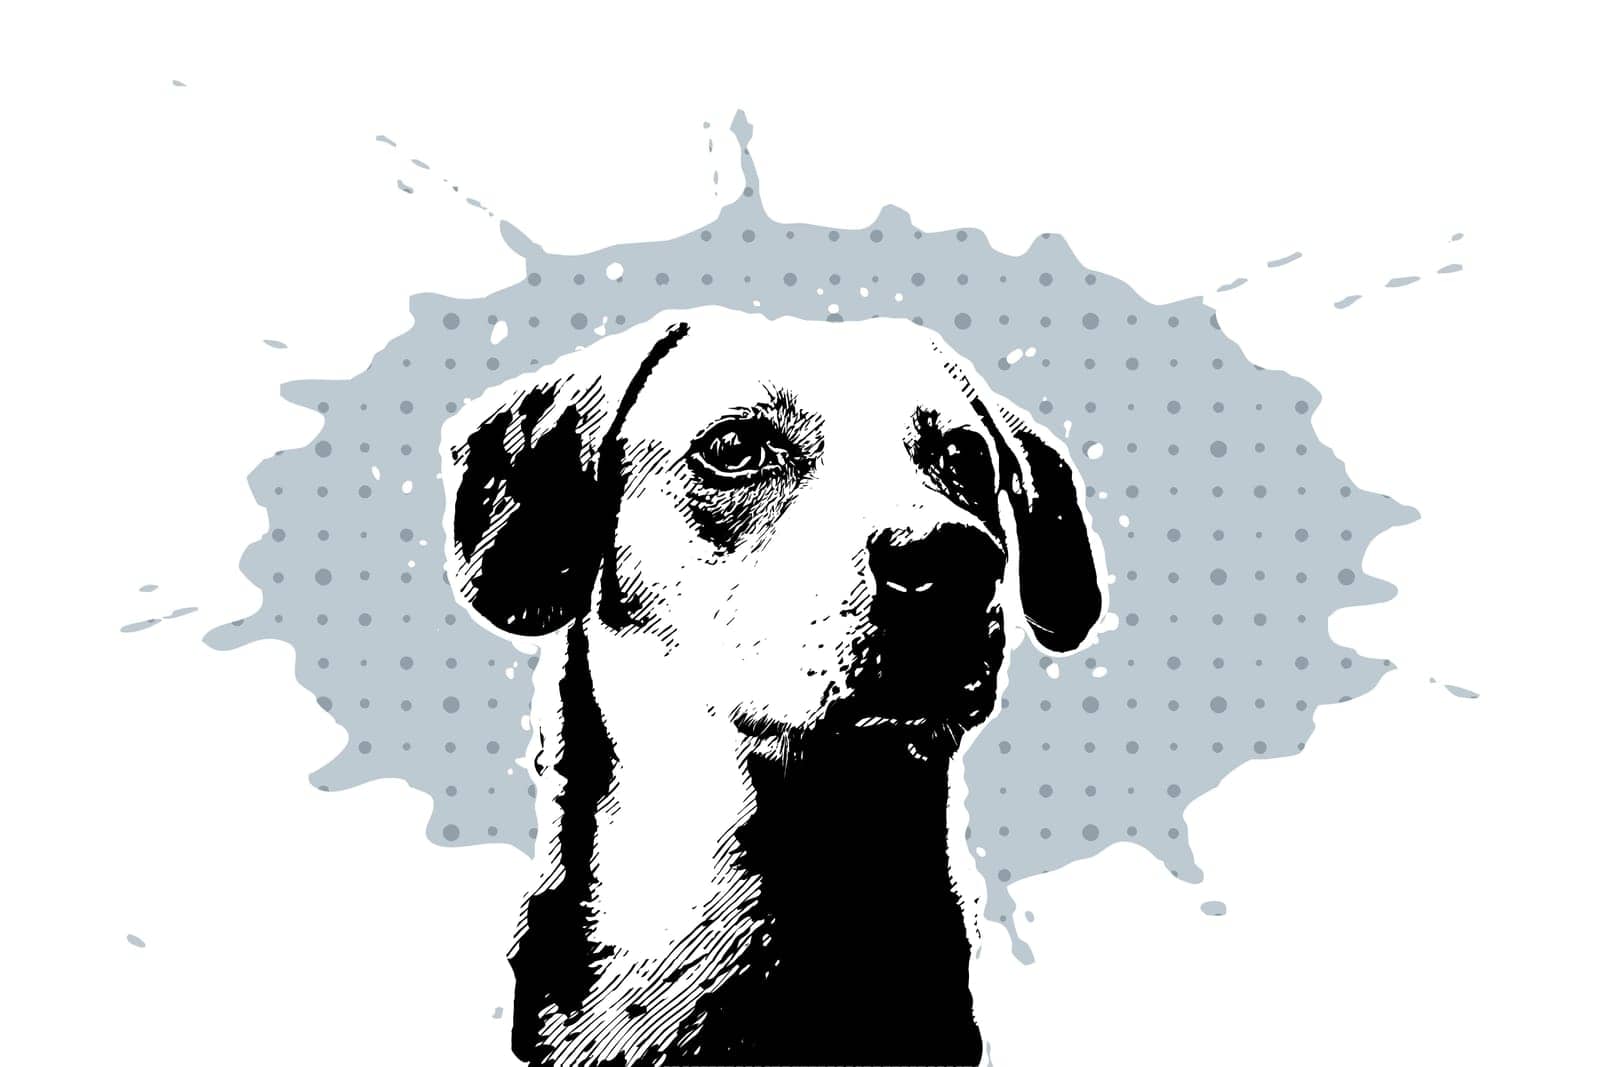 Head of a brown dog on pattern background, comic black and white sketch style, vector illustration